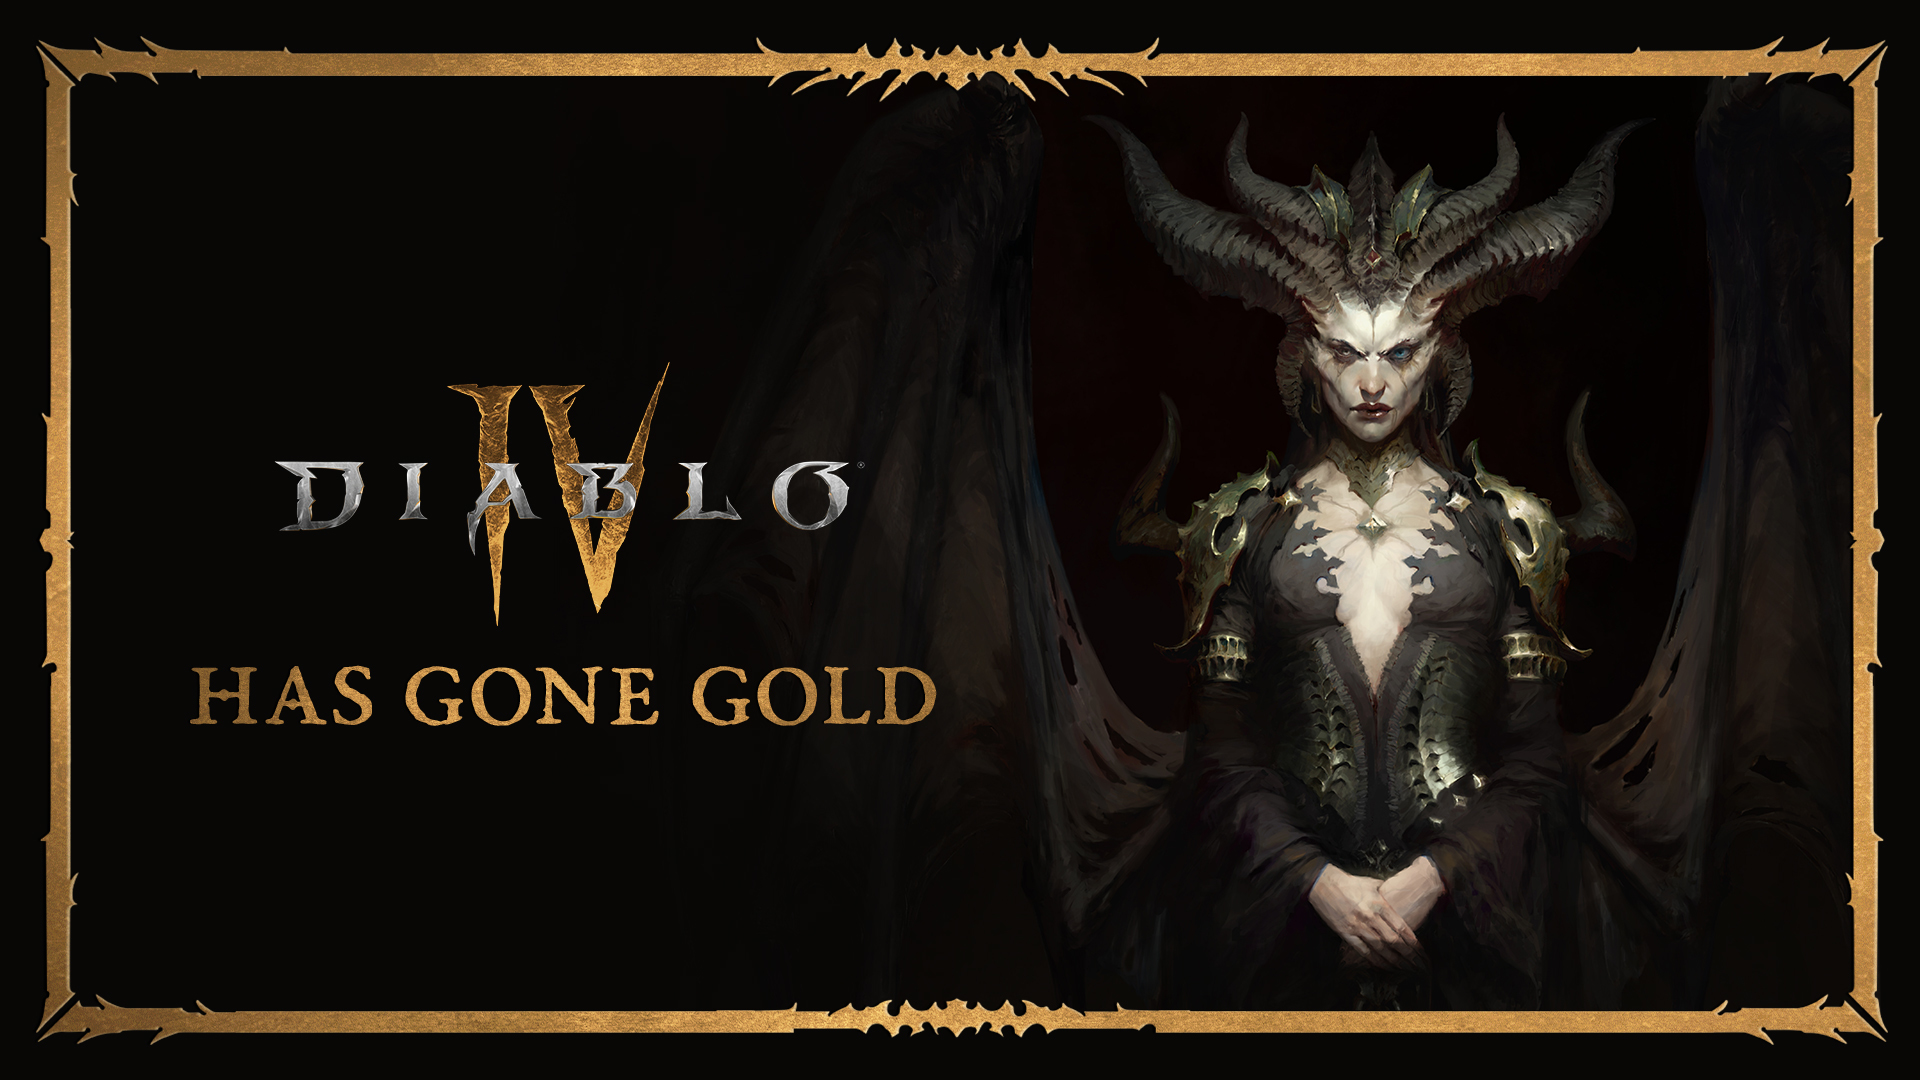 Diablo IV is already “gold” and protects its June 6 release date